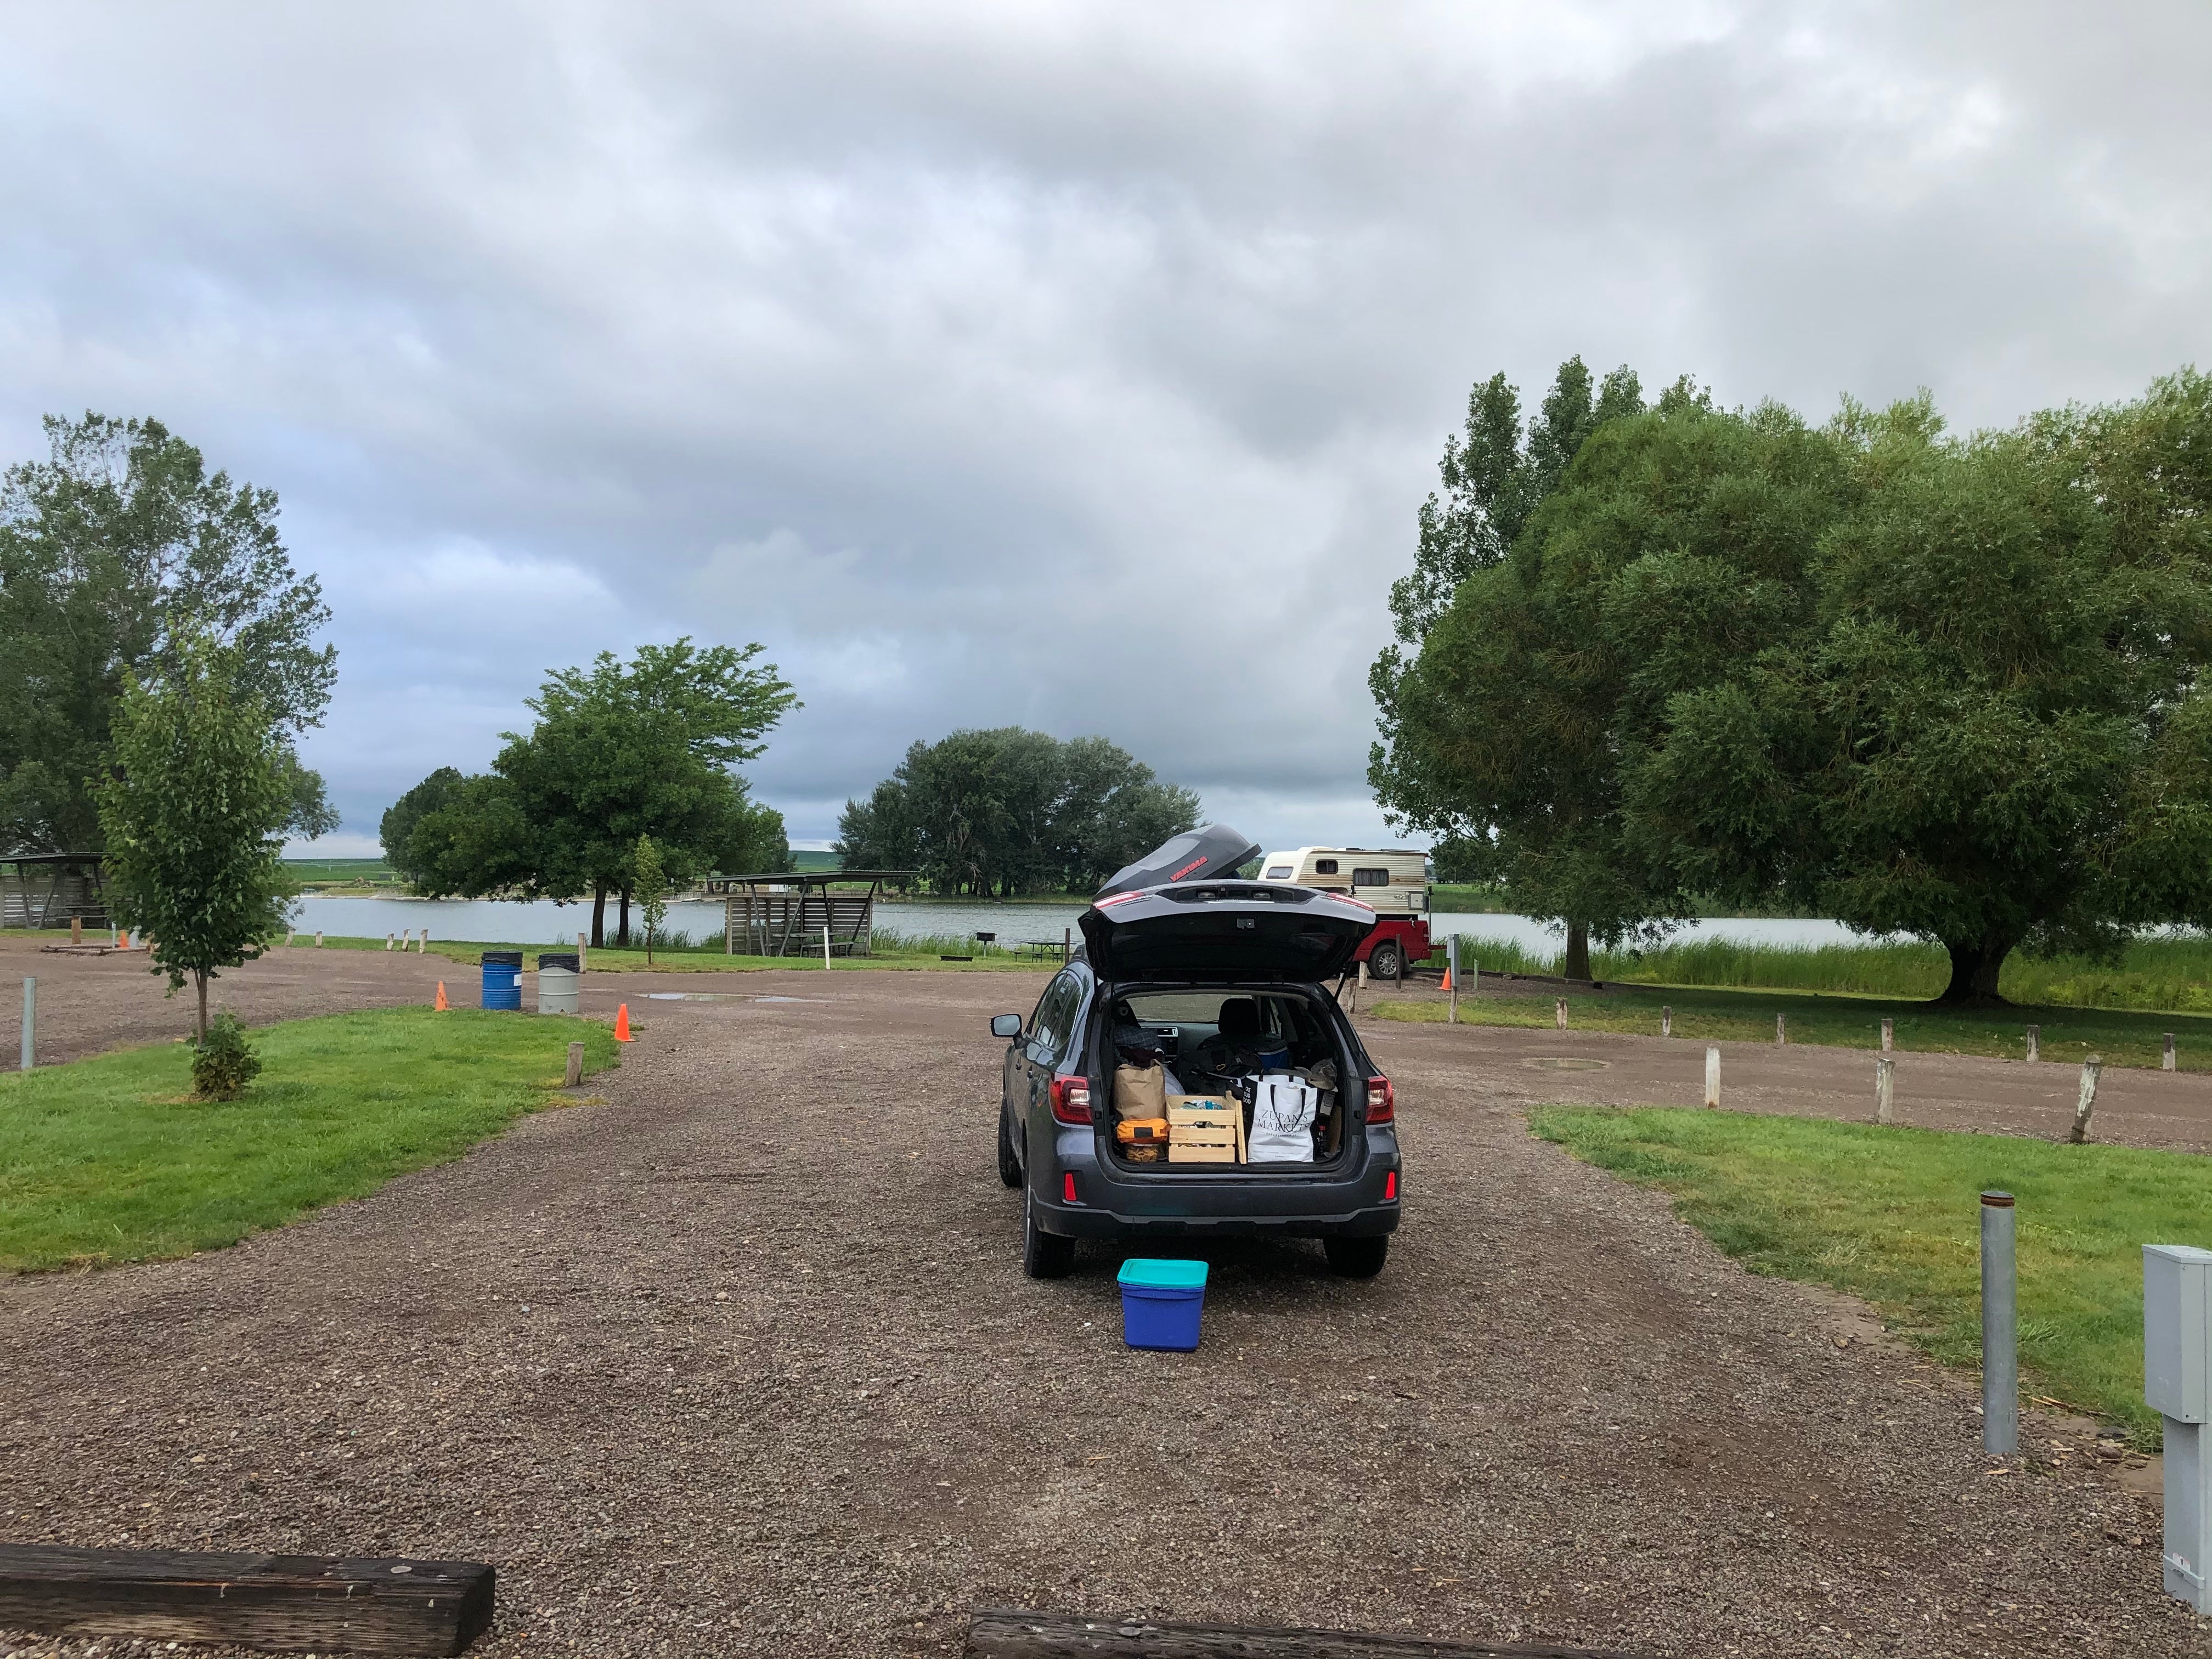 Camper submitted image from Twin Falls County Murtaugh Lake Park - 2